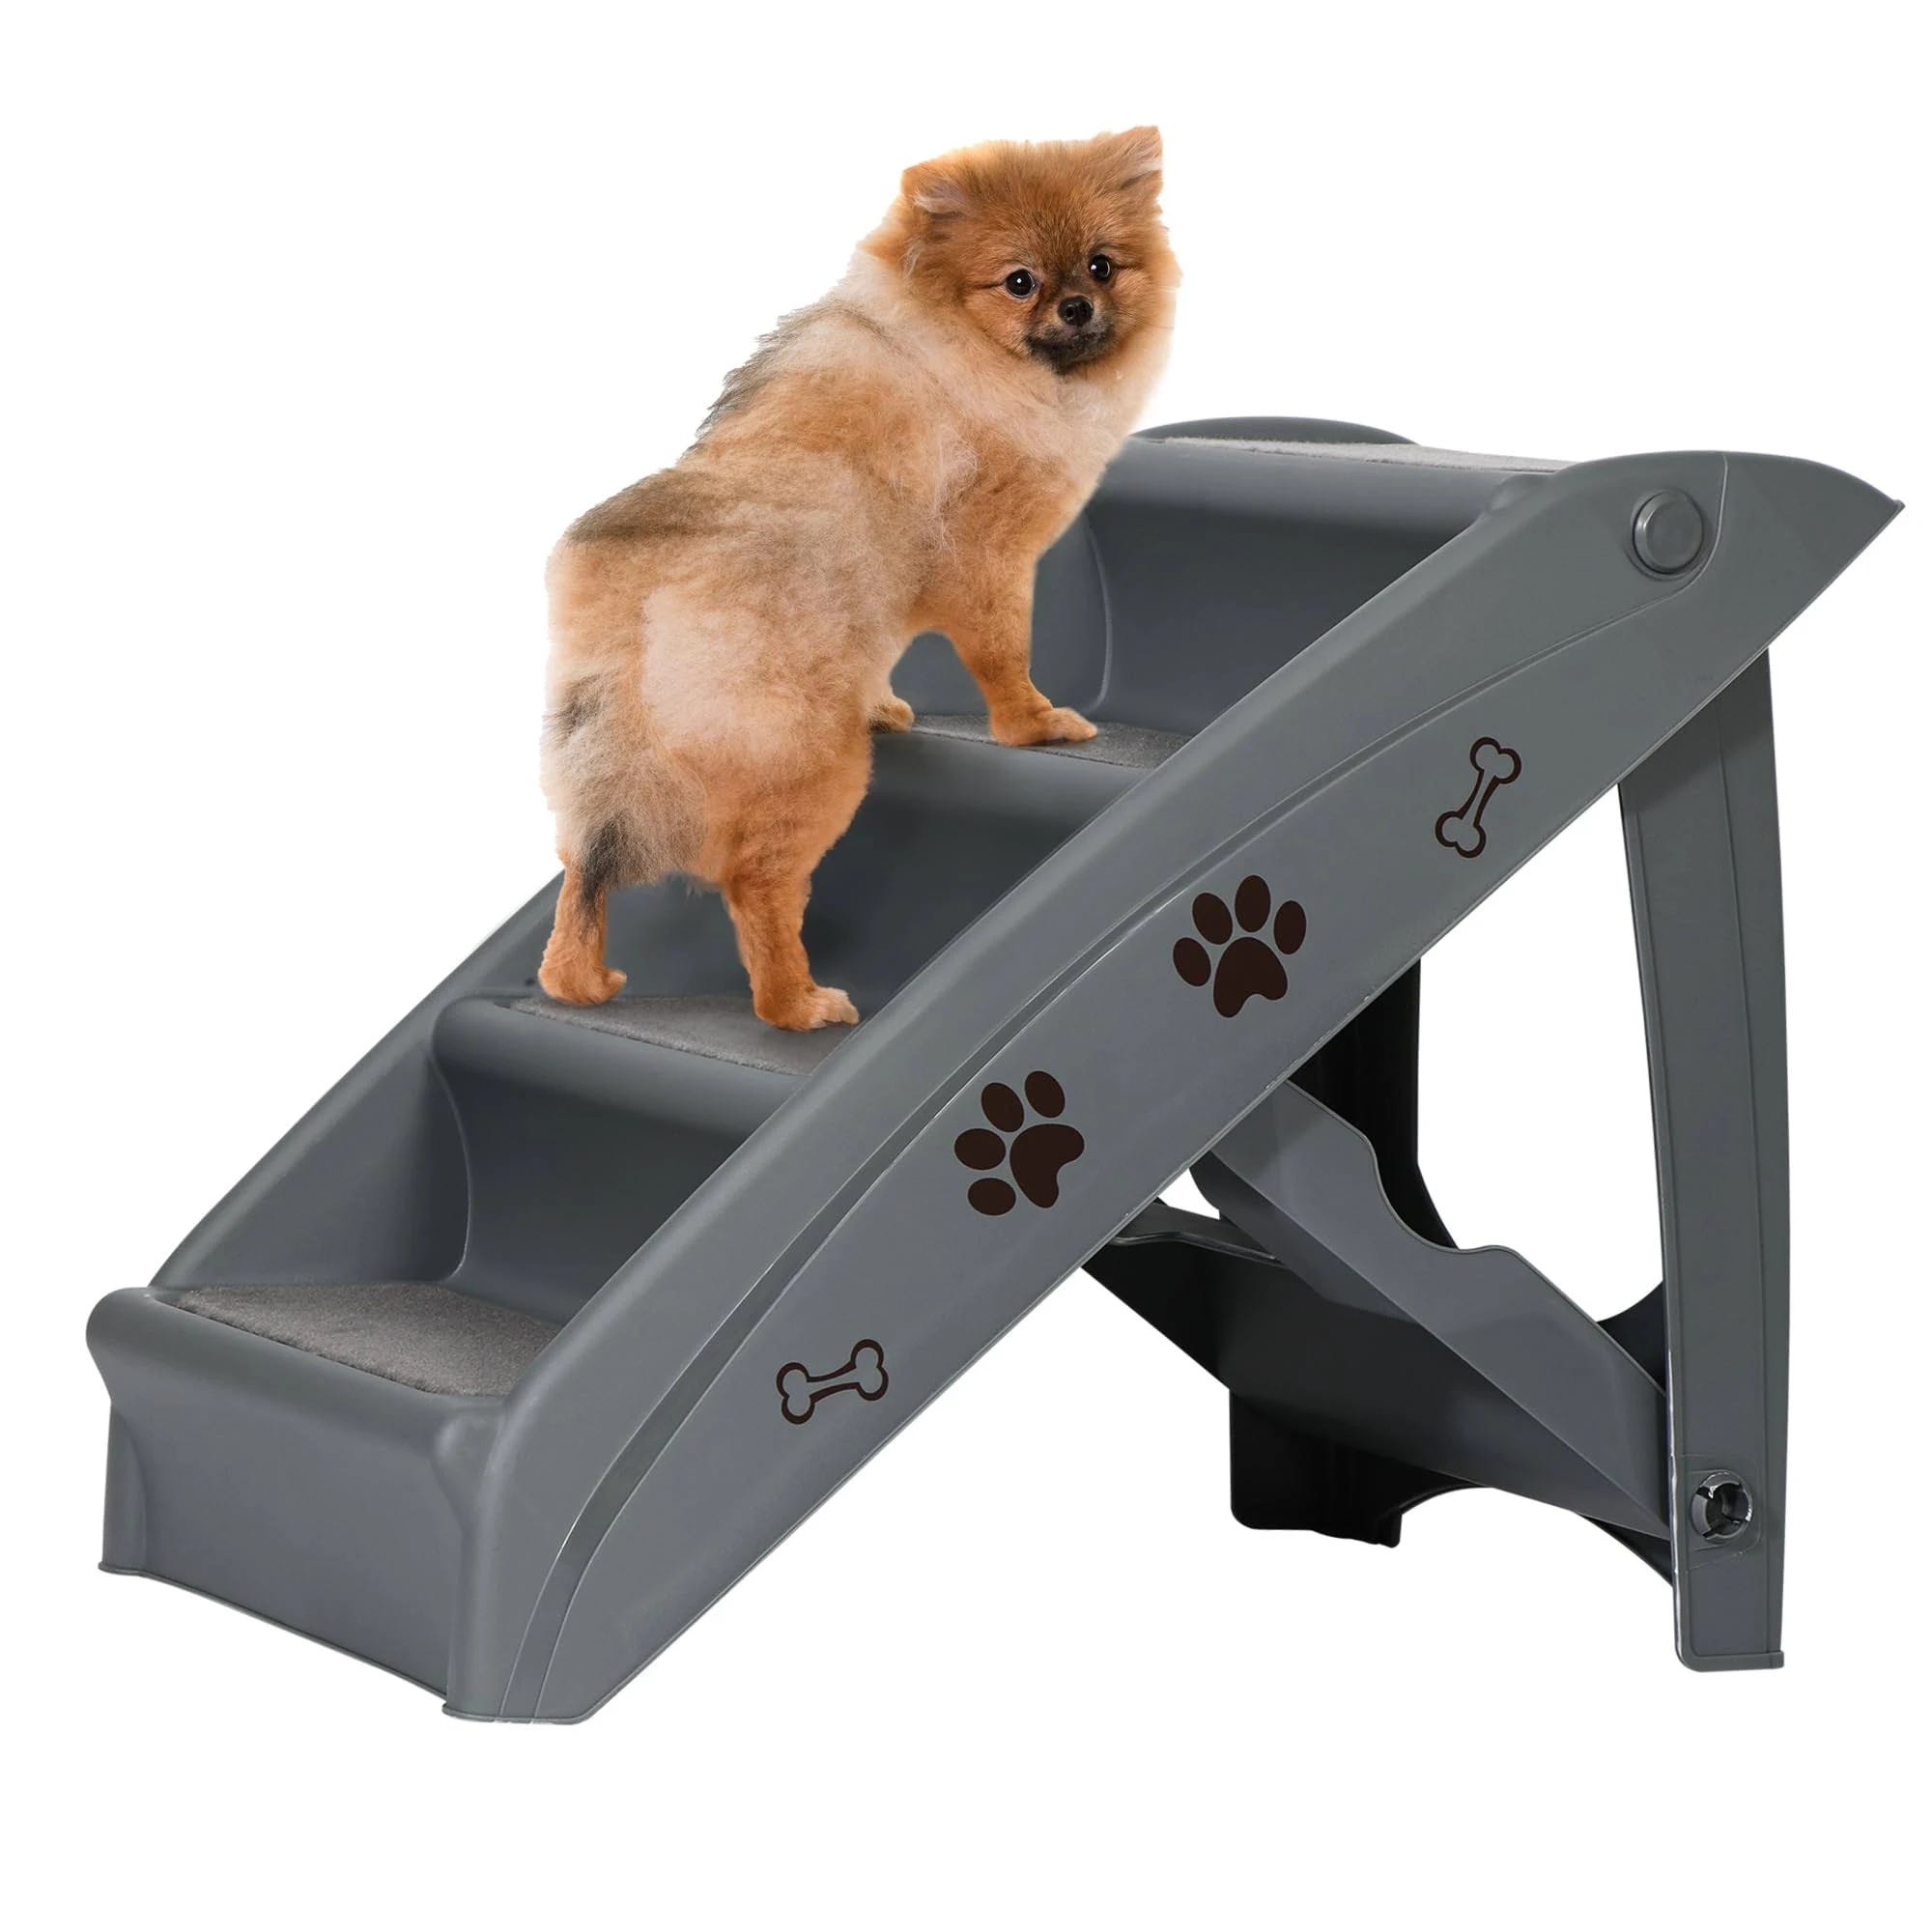 Epetlover Pet Steps: Compact 4-Step Folding Ladders for Small Cats and Dogs | Image